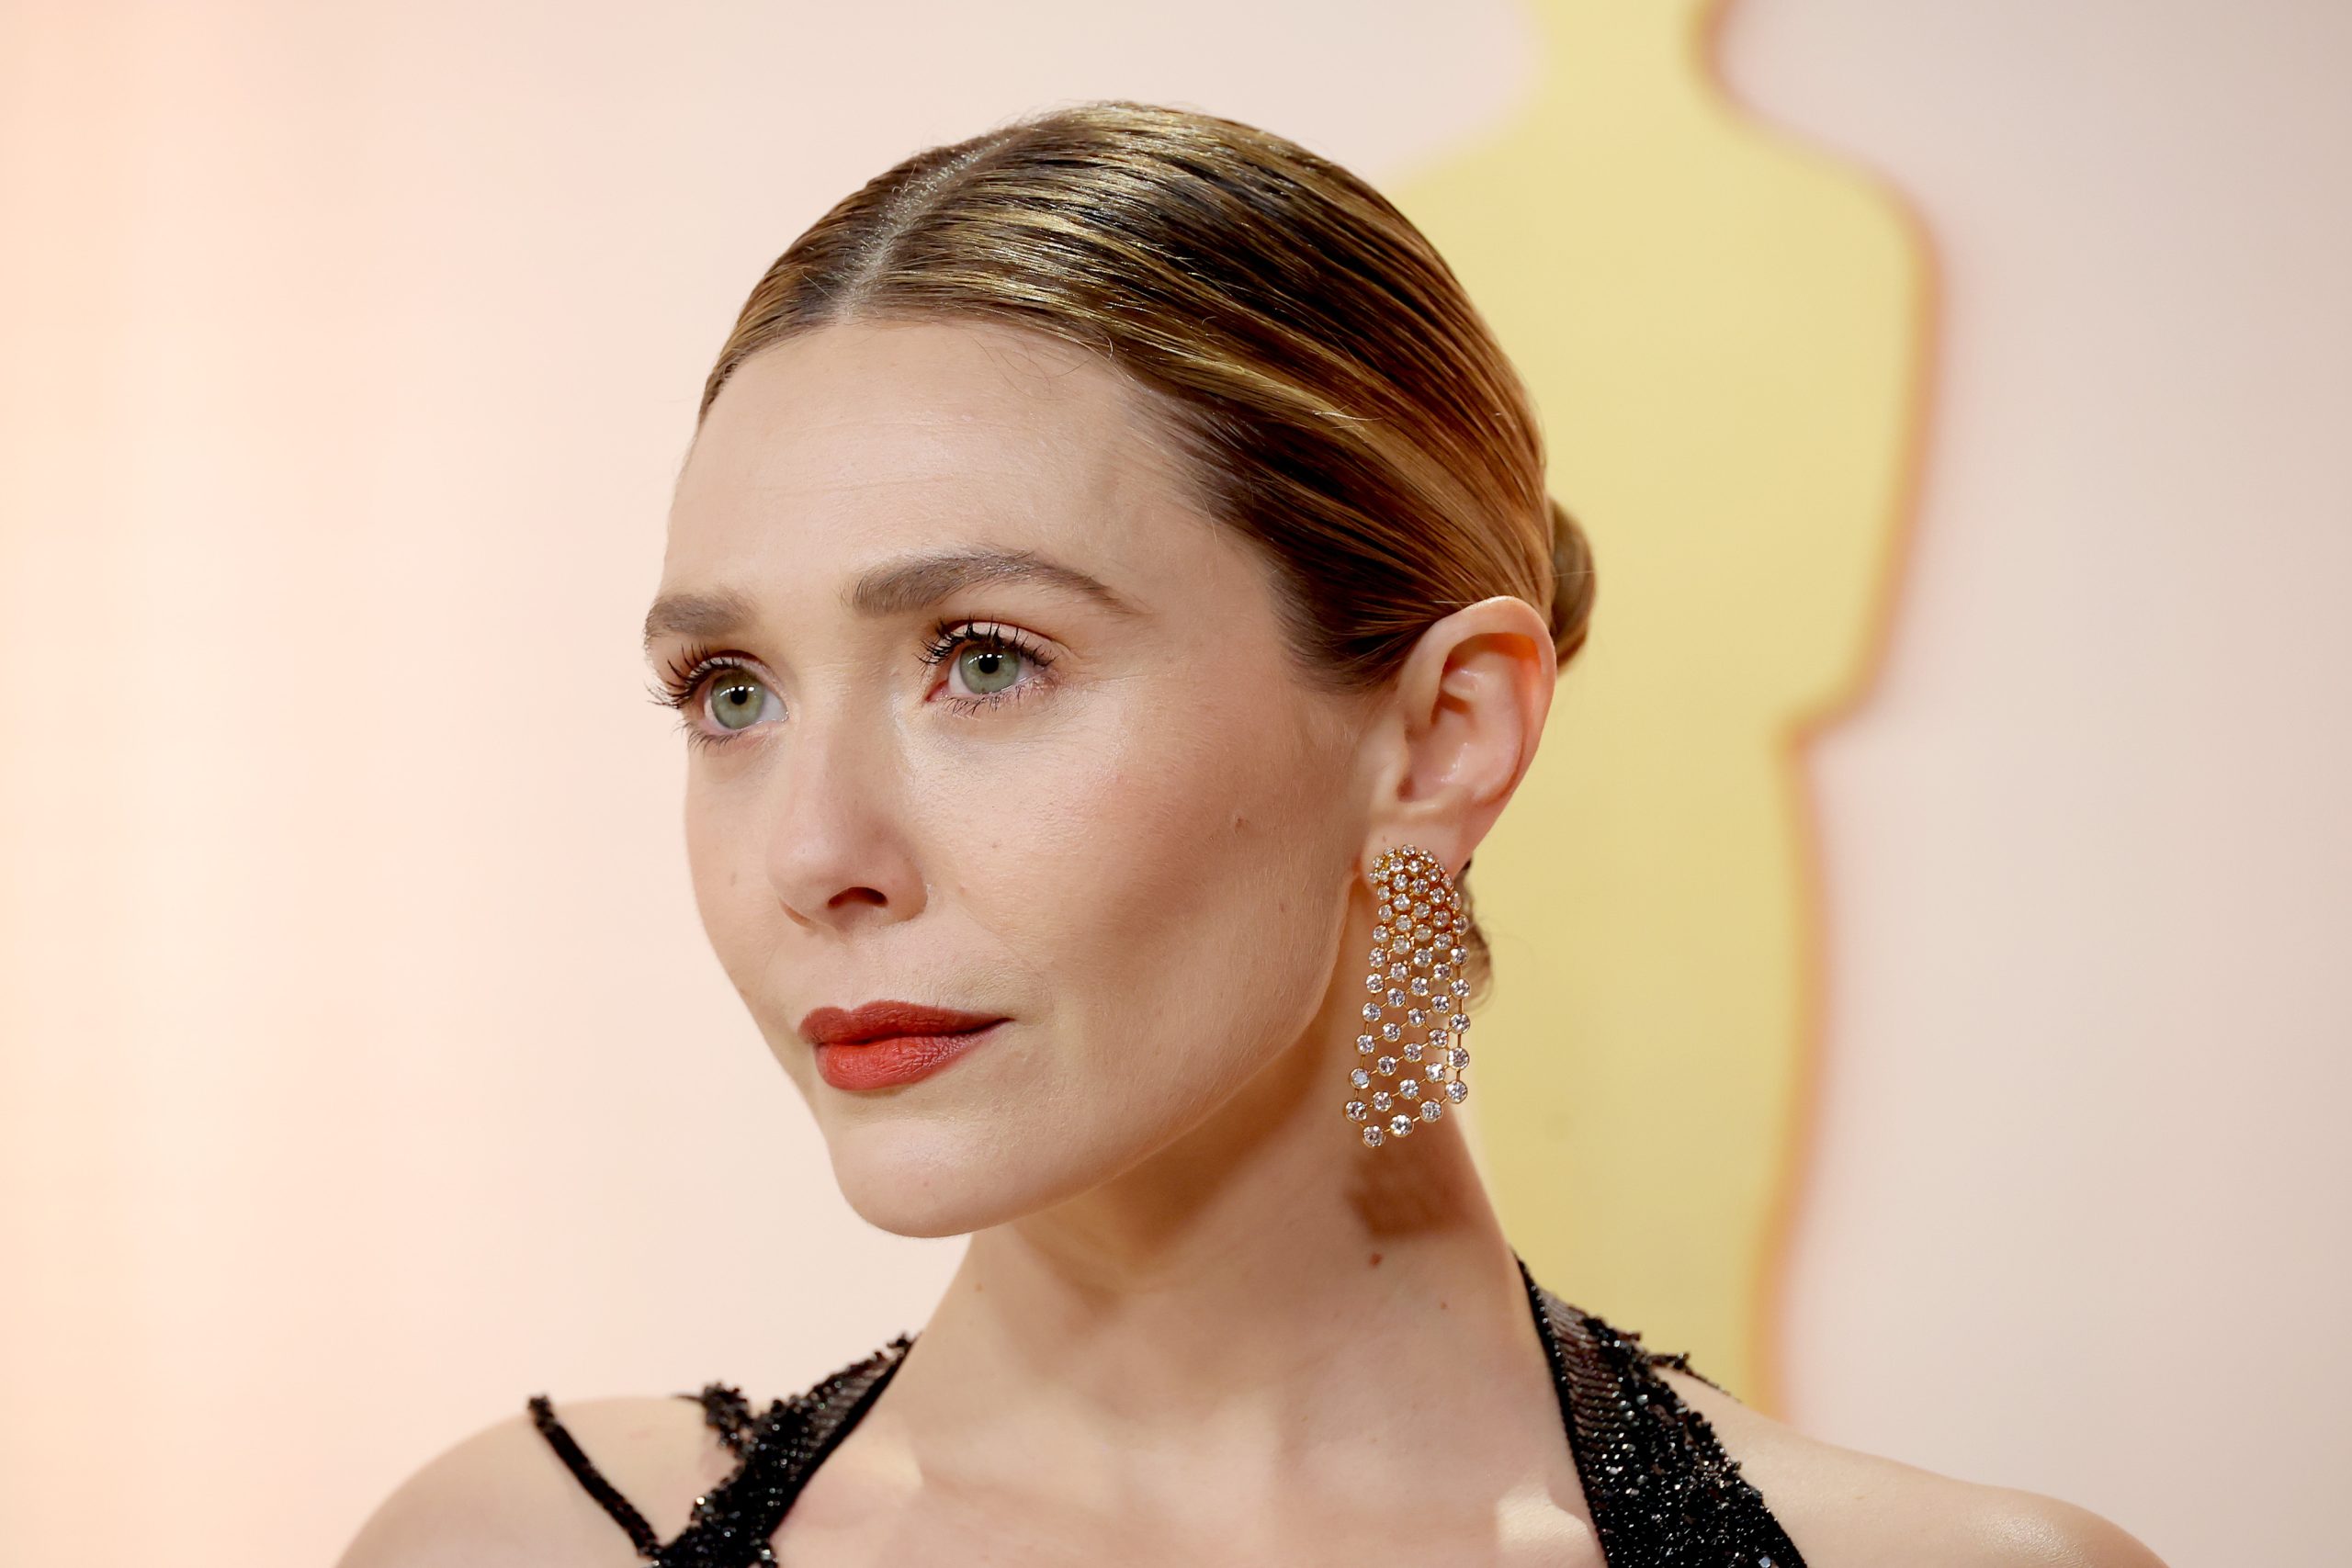 HOLLYWOOD, CALIFORNIA - MARCH 12: Elizabeth Olsen attends the 95th Annual Academy Awards on March 12, 2023 in Hollywood, California. (Photo by Mike Coppola/Getty Images)